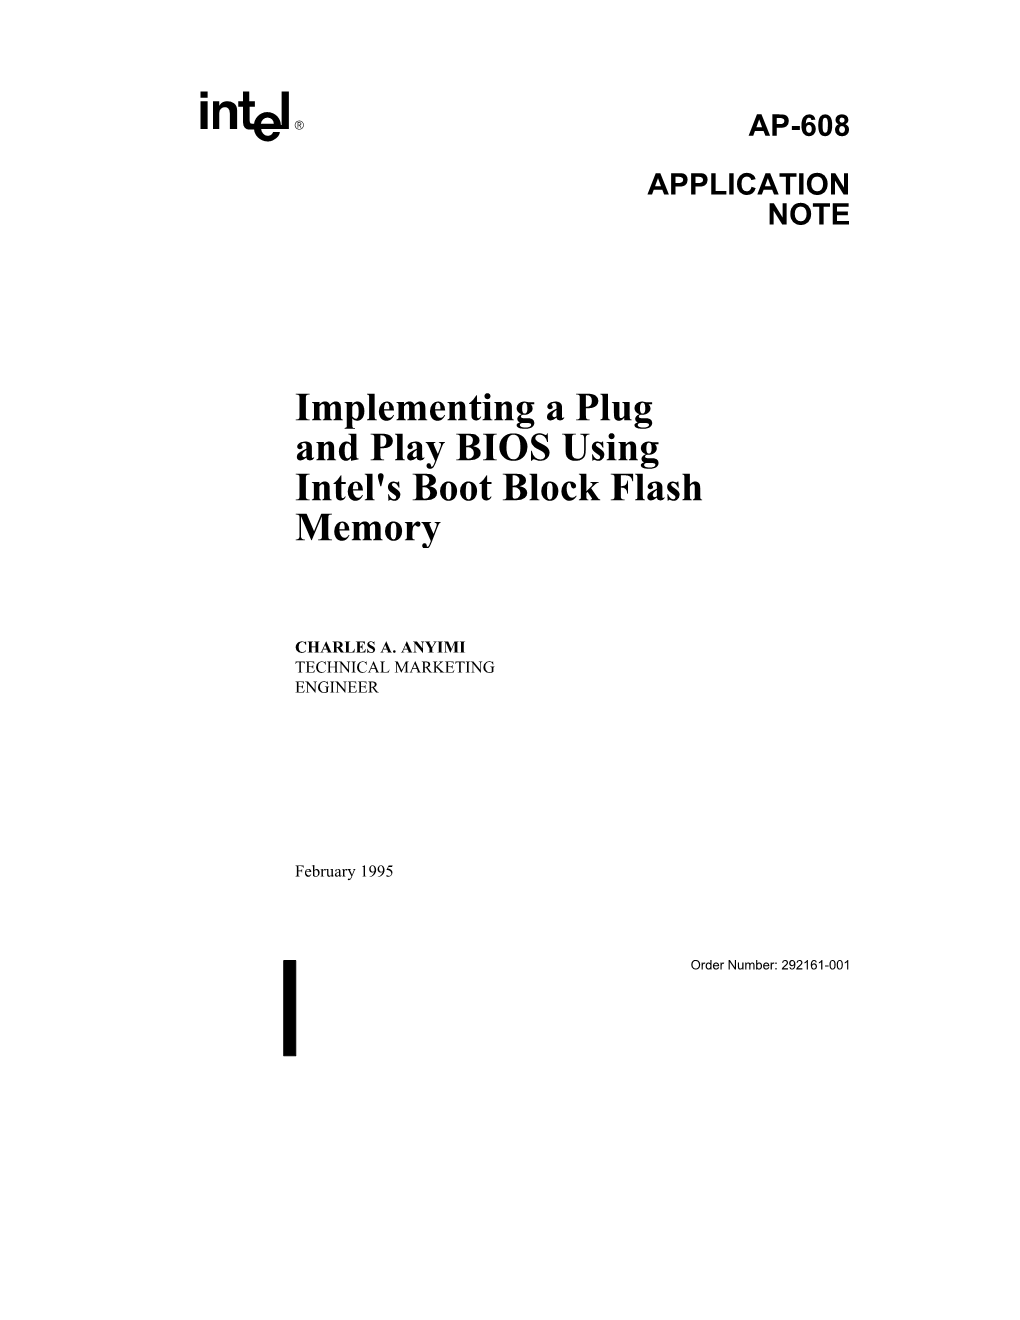 Implementing a Plug and Play BIOS Using Intel's Boot Block Flash Memory